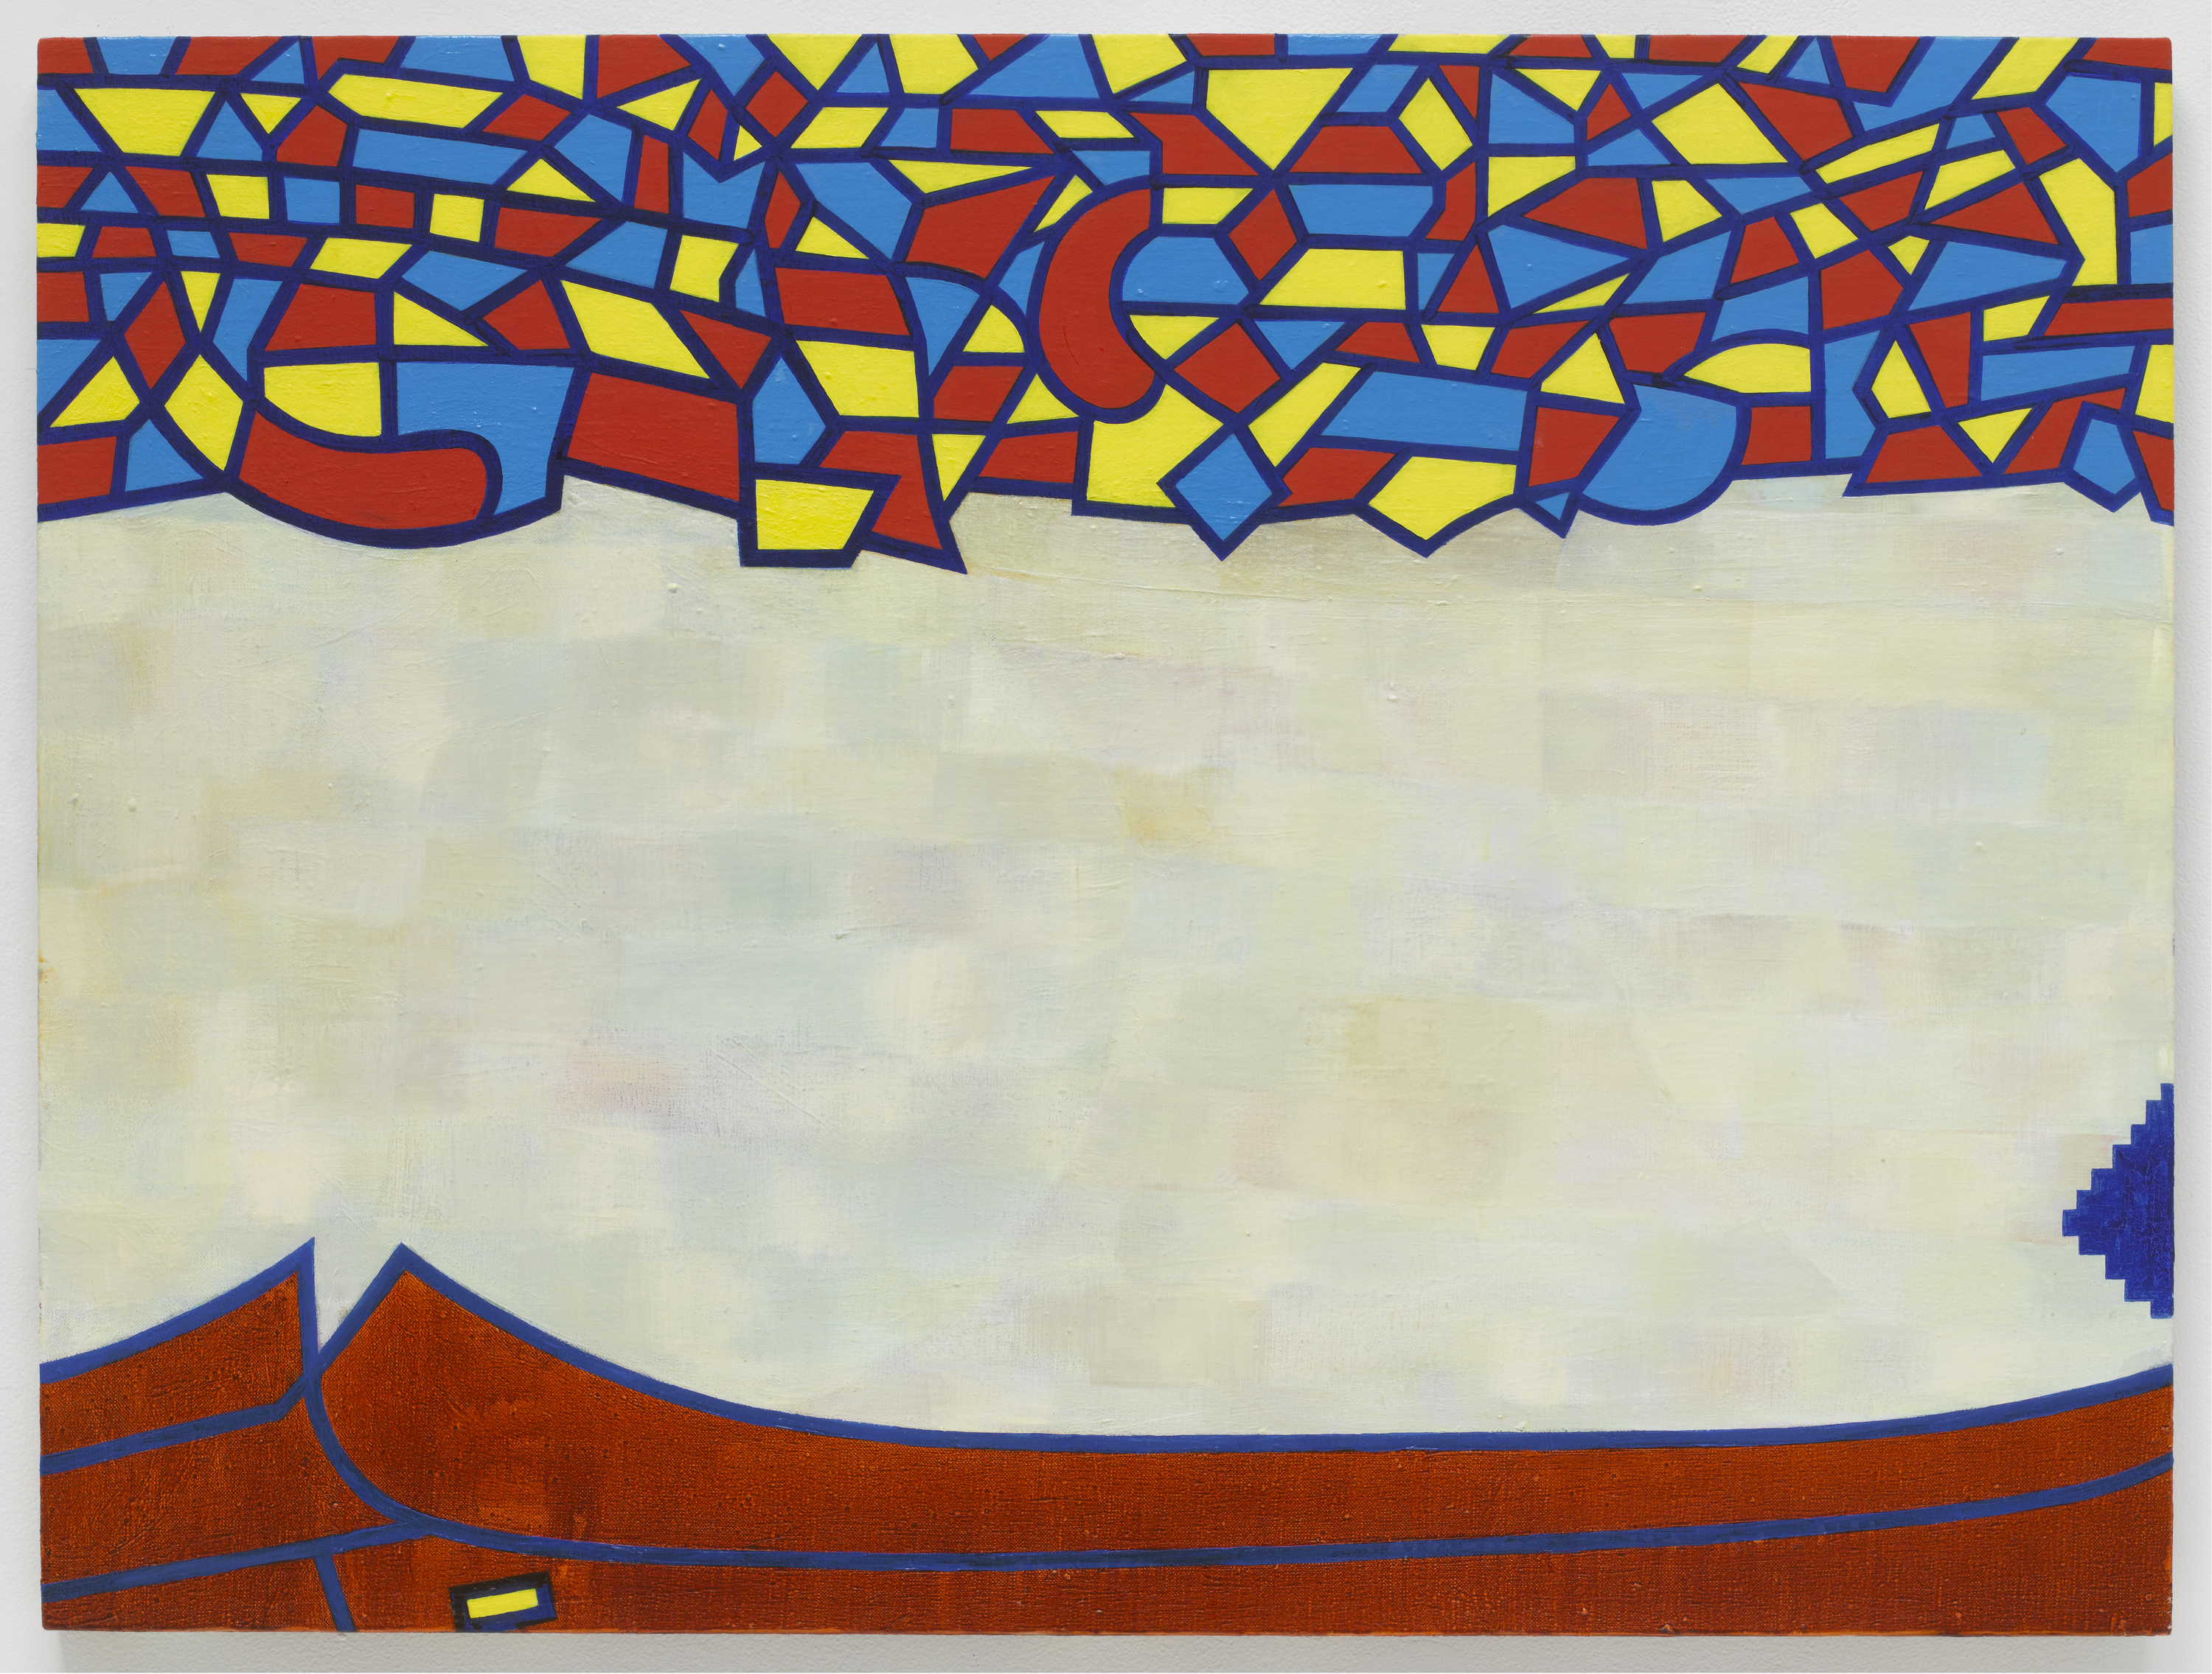 Image showing a painting with bright geometric patterns at the top and the bottom with a subtle geometric pattern in-between